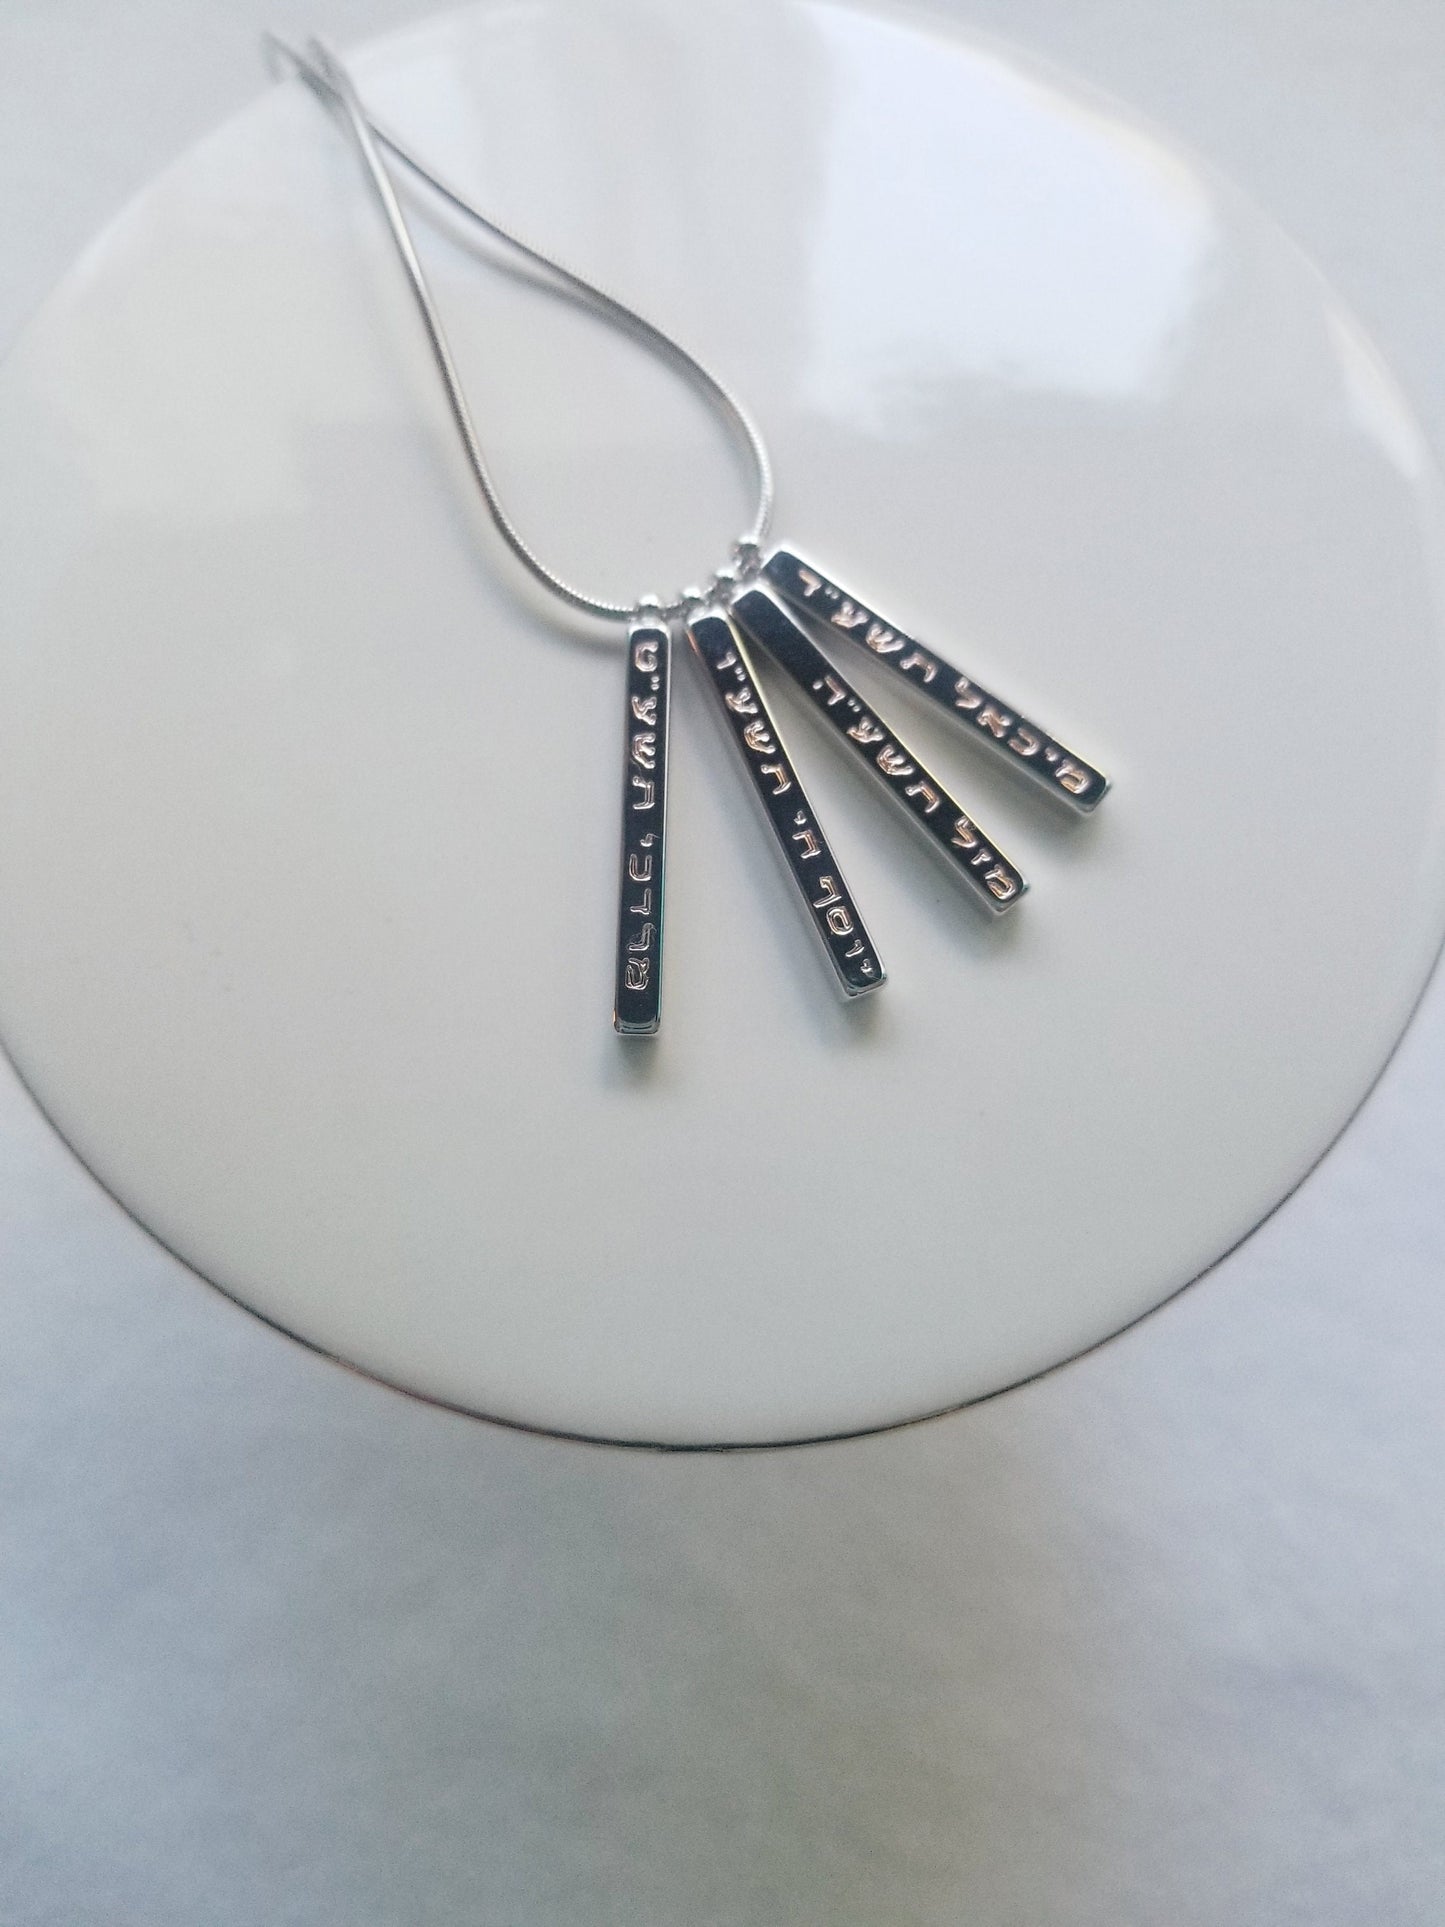 Personalized Family necklace with child's name engraved